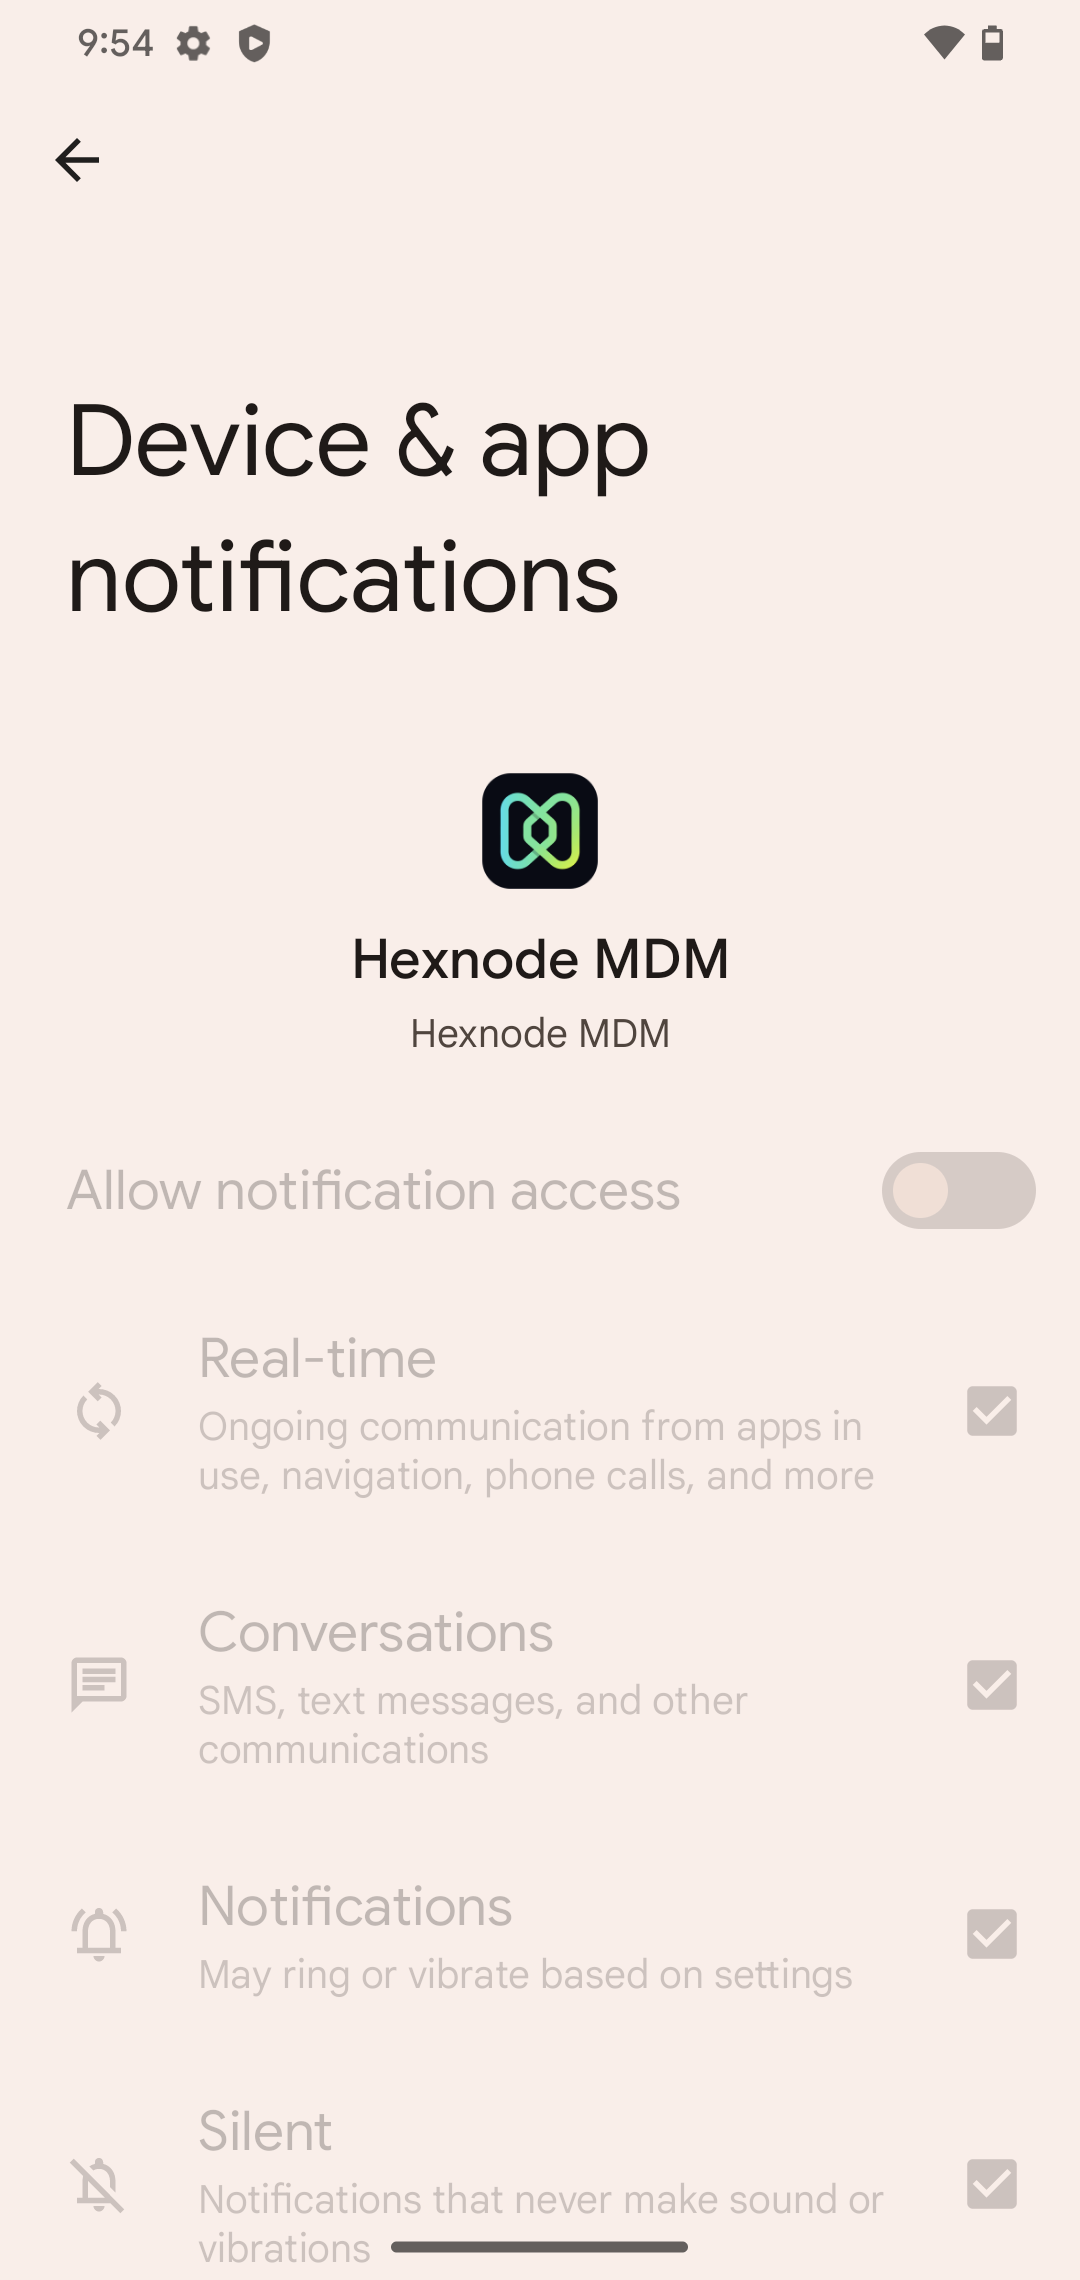 Allow notification access option is disabled under the Device & app notifications page of the Hexnode app